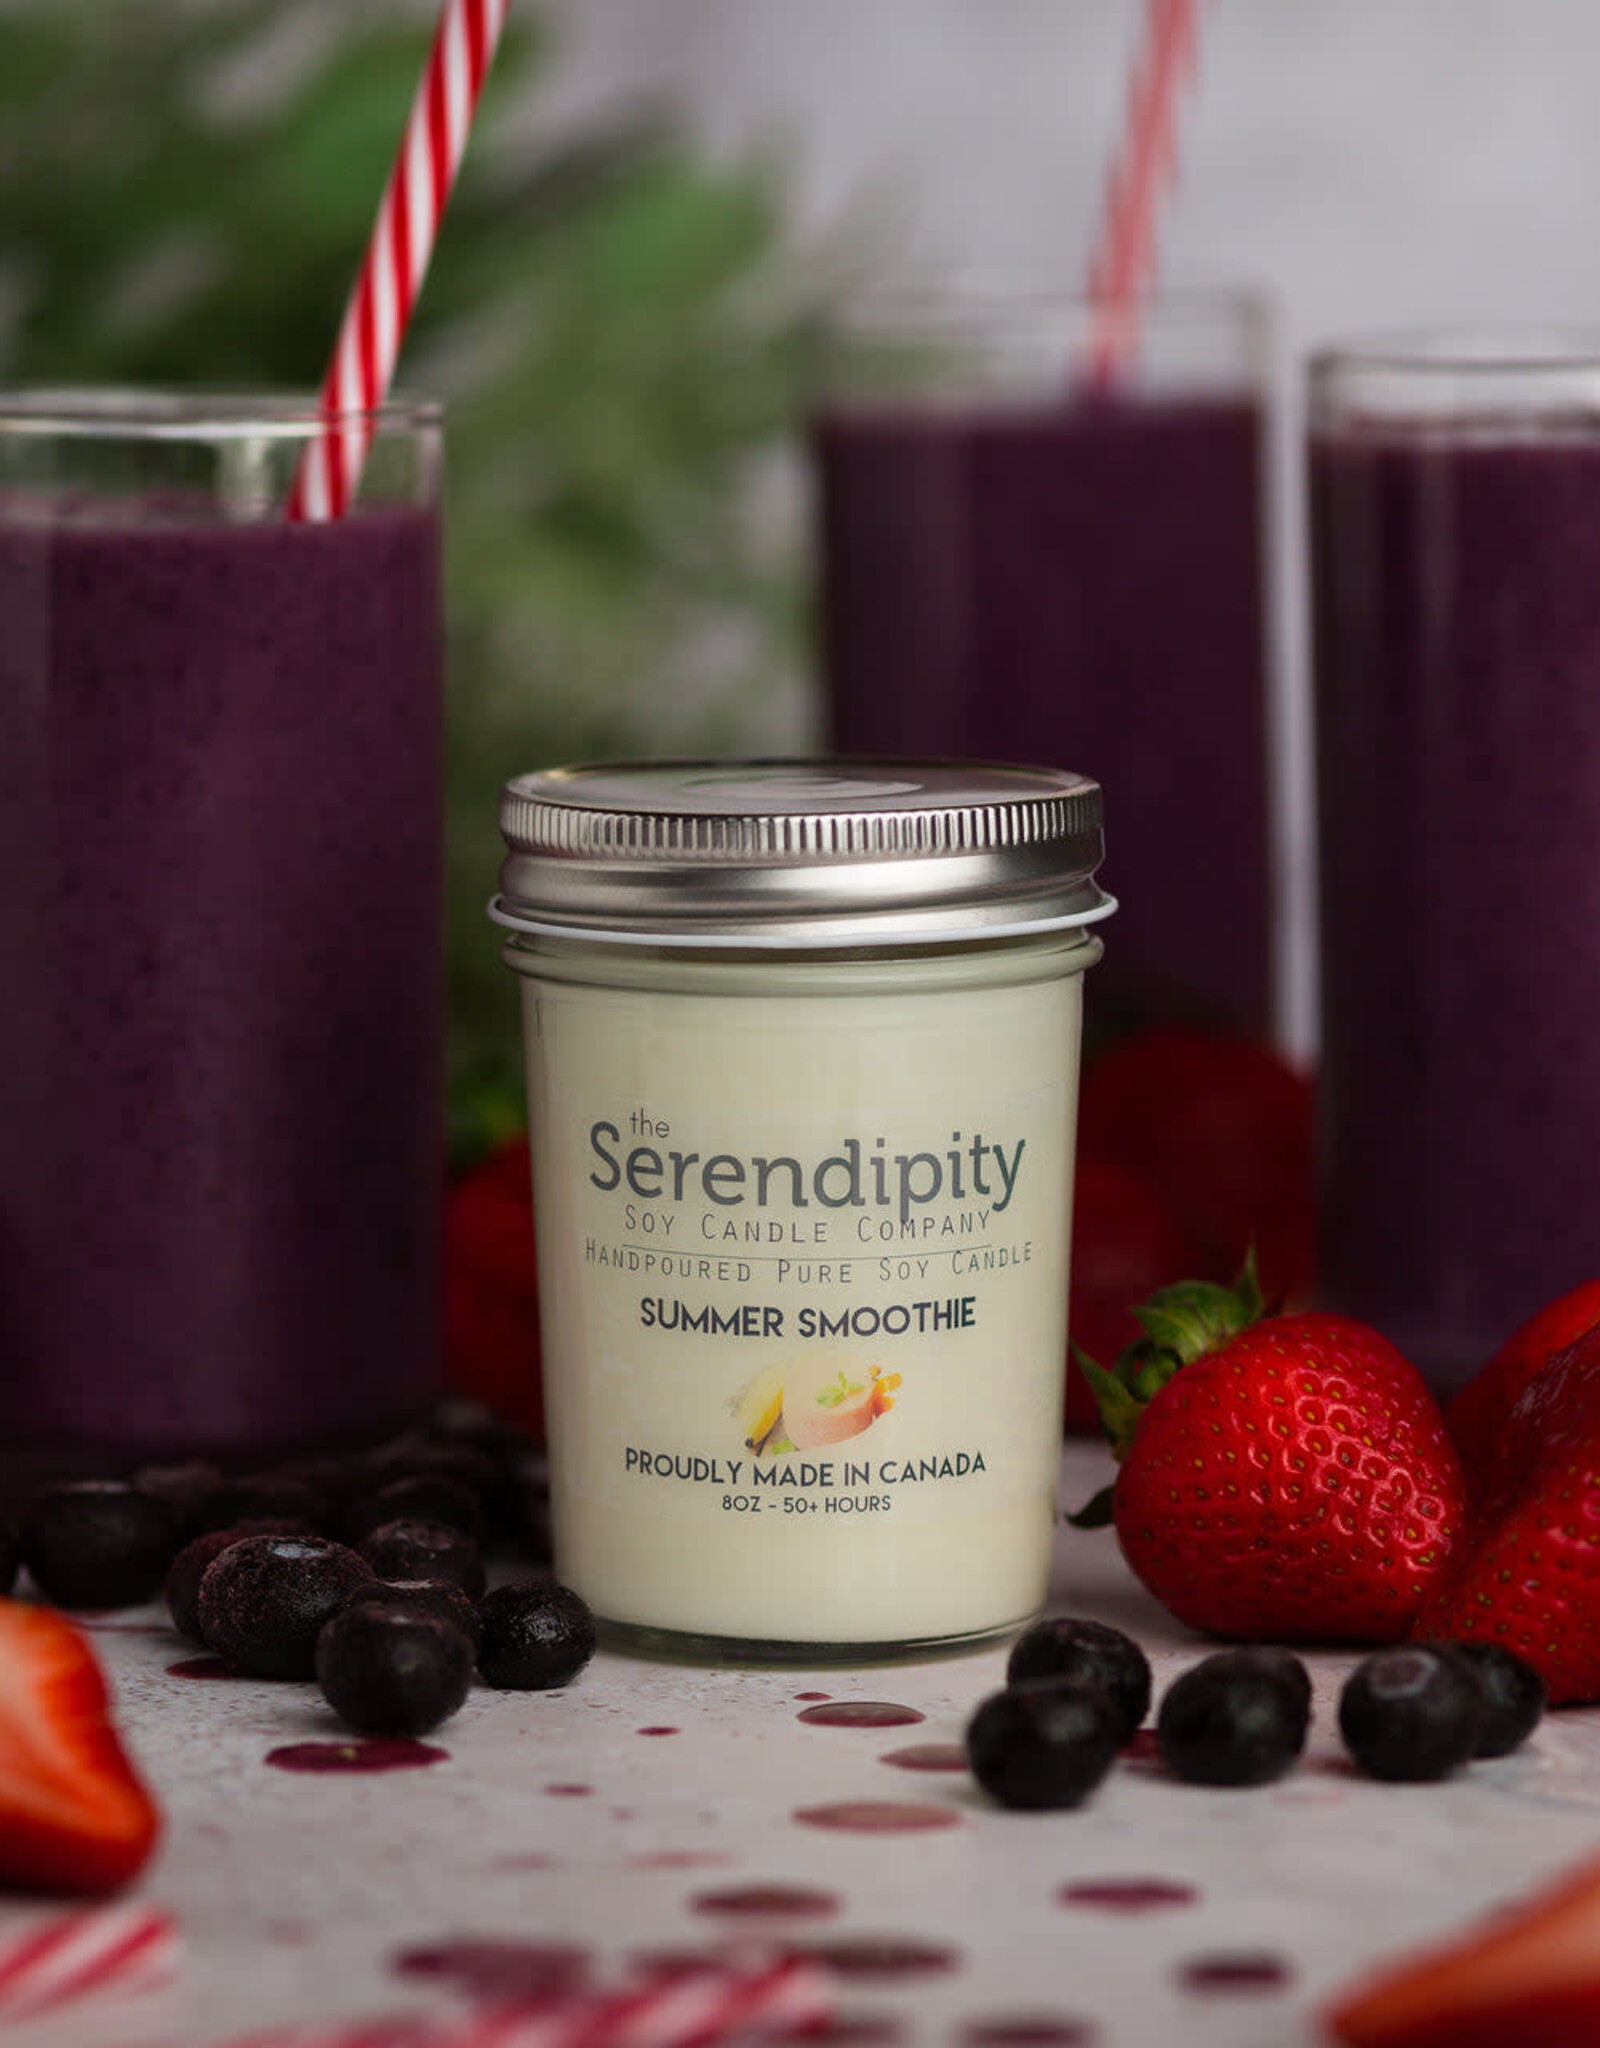 Serendipity Soy Candles 8oz Jar Candle - Summer Smoothie